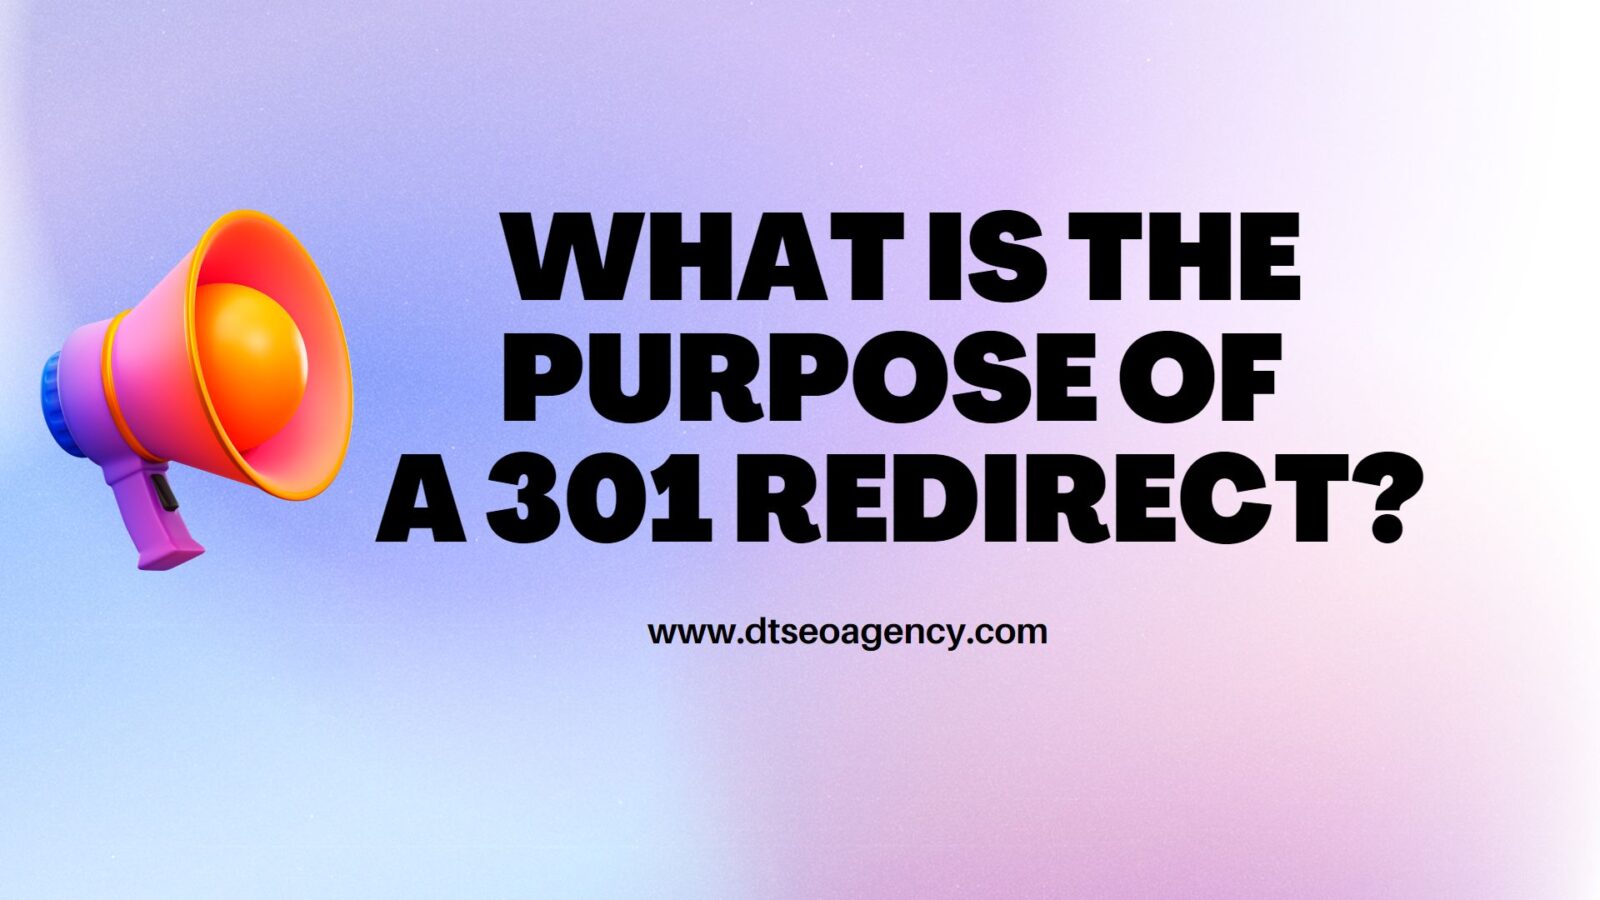 What is the purpose of a 301 redirect?